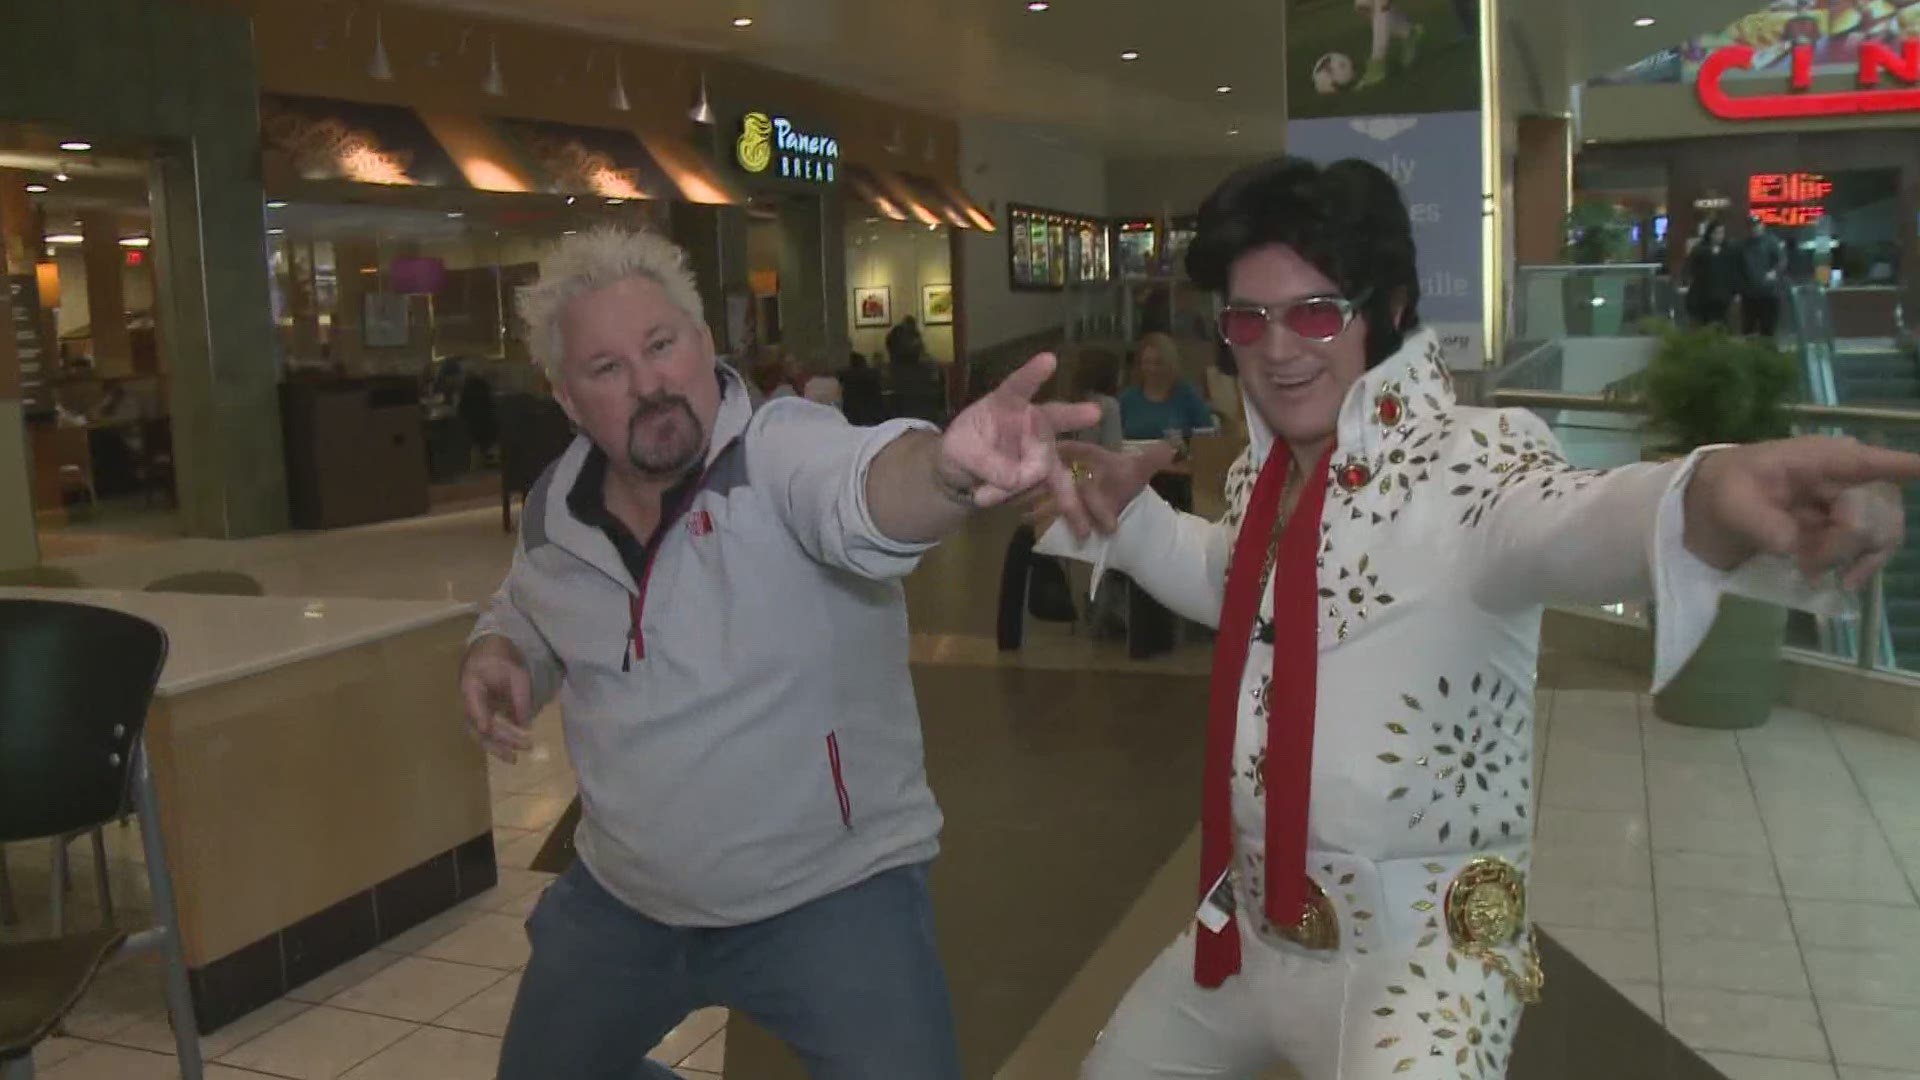 Feb. 13, 2019: Ladies and gentleman, Elvis is in the house. We sent Austin Love out with an Elvis impersonator to see how much people truly know about the King.